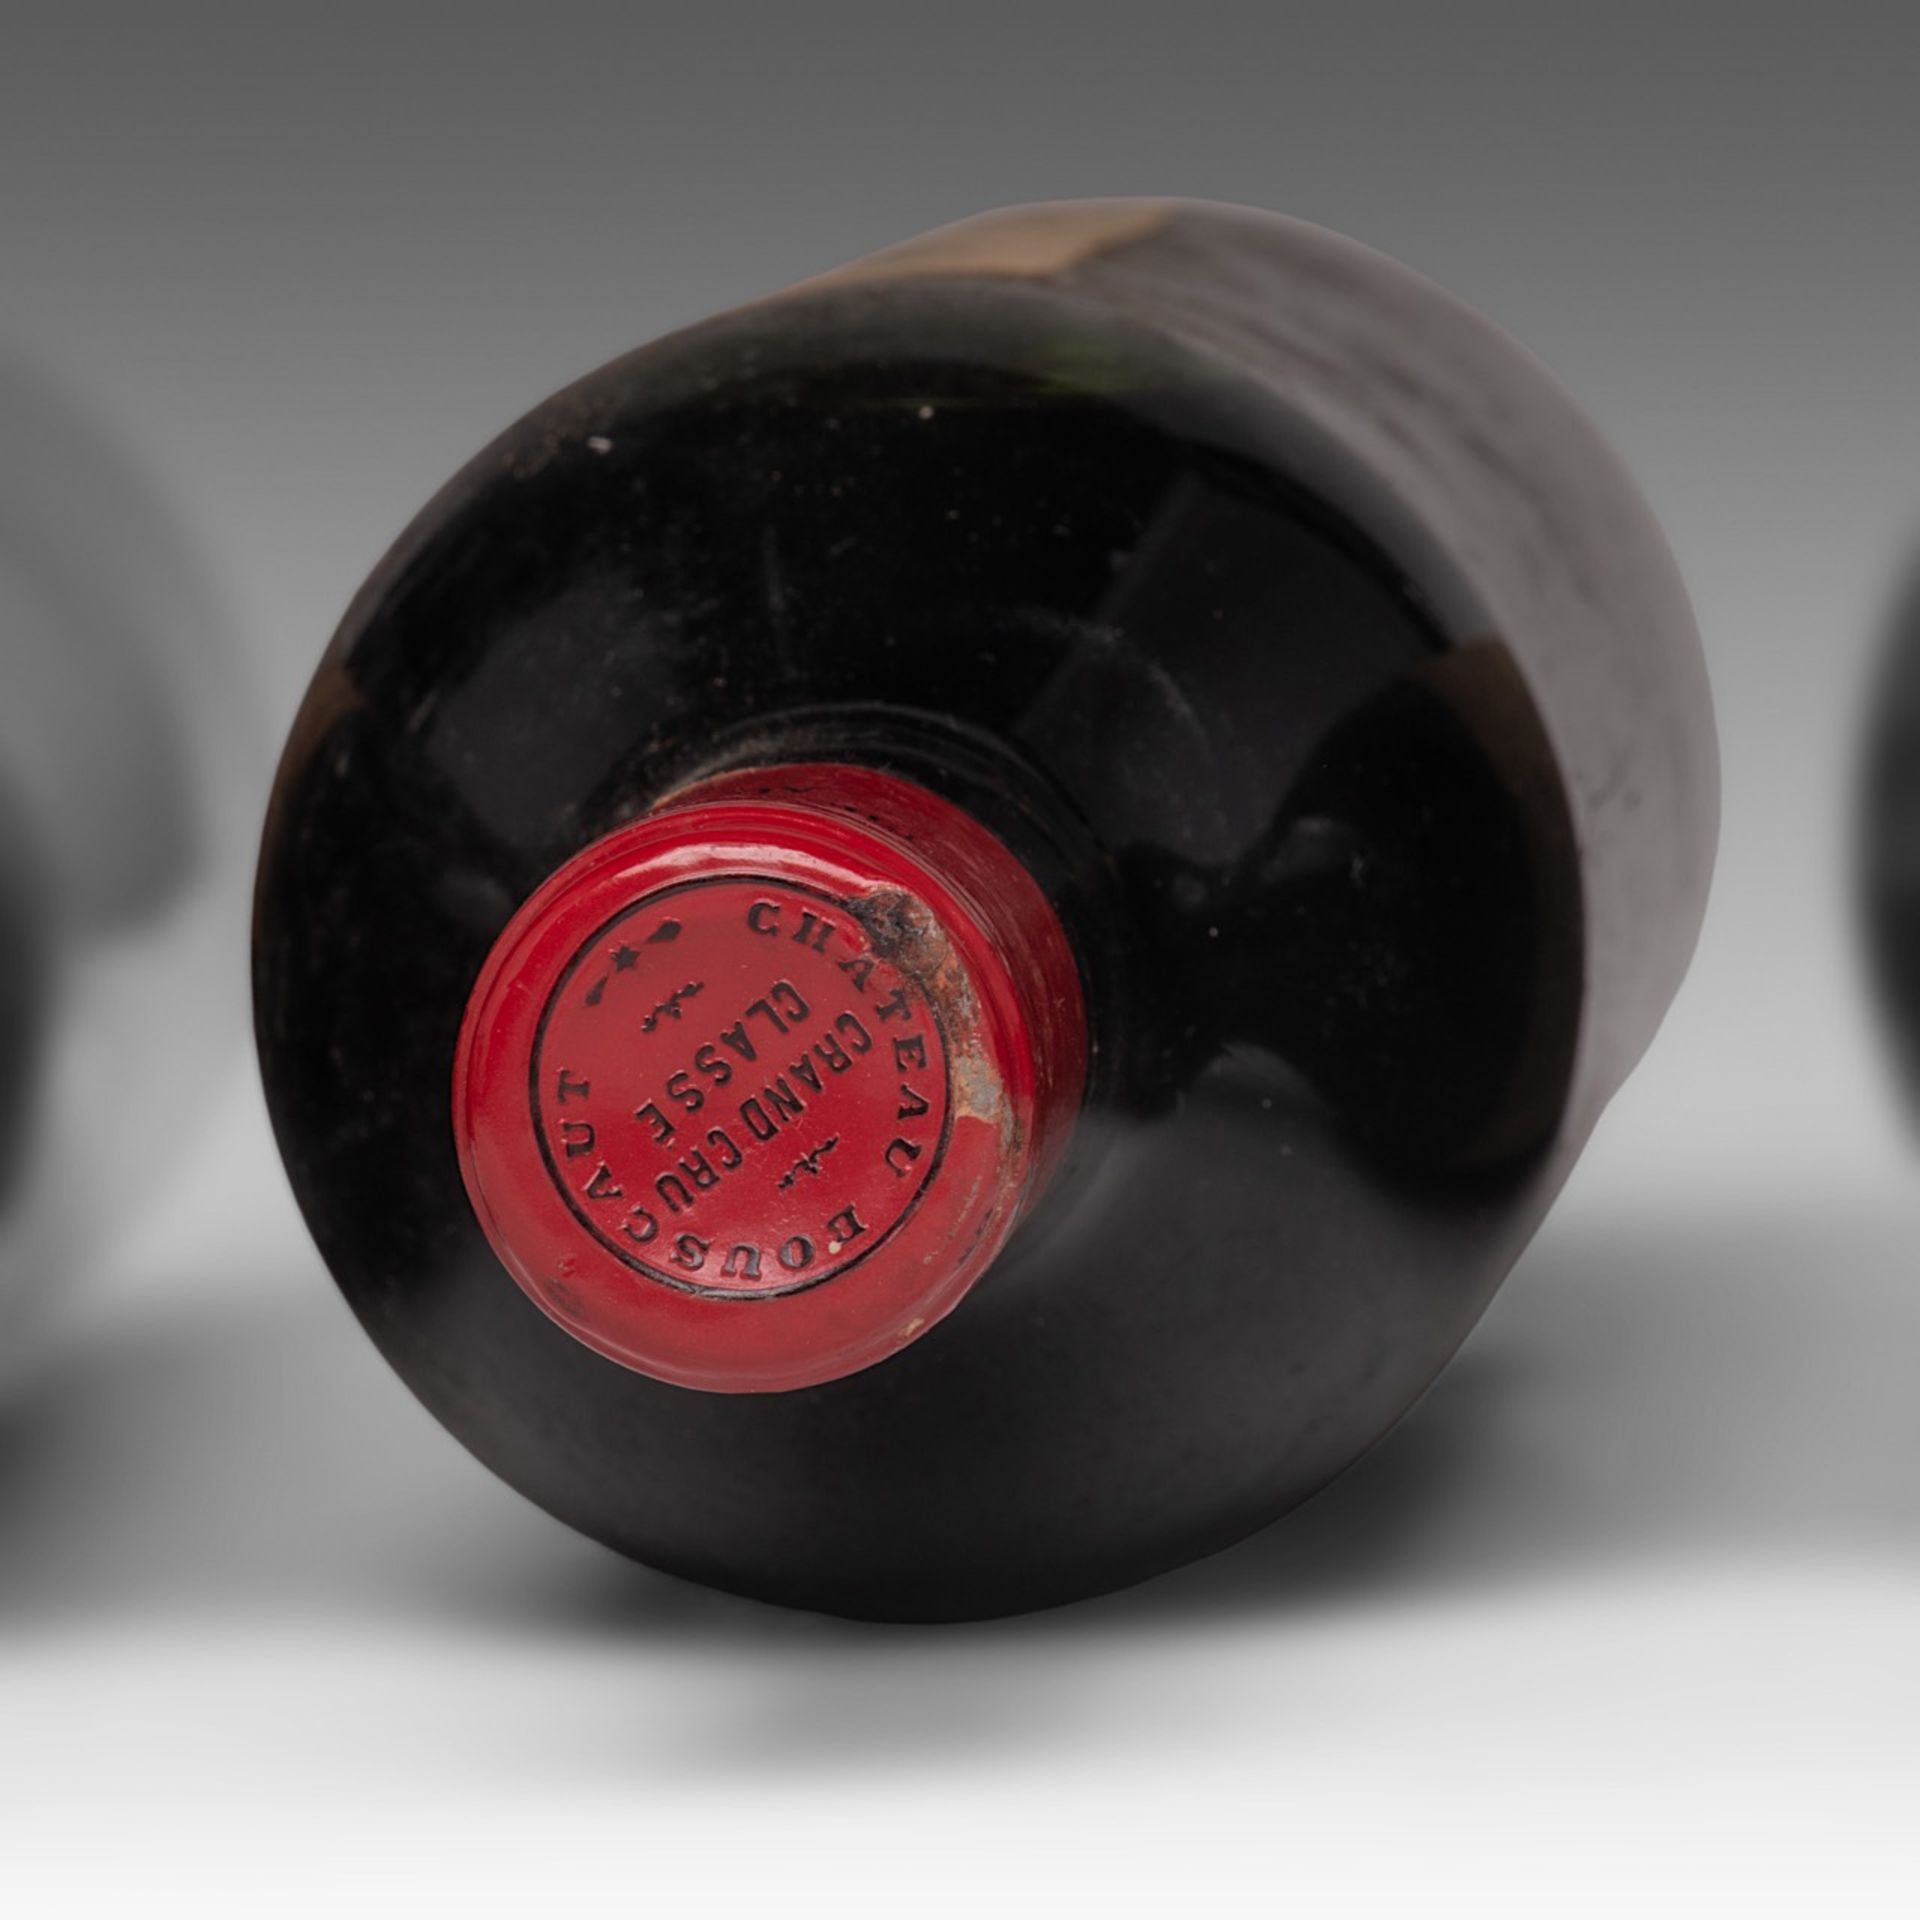 A various collection of wines: one bottle 'Chateau Montrose', 1929, one bottle 'Chateau Bouscaut', 1 - Image 7 of 8